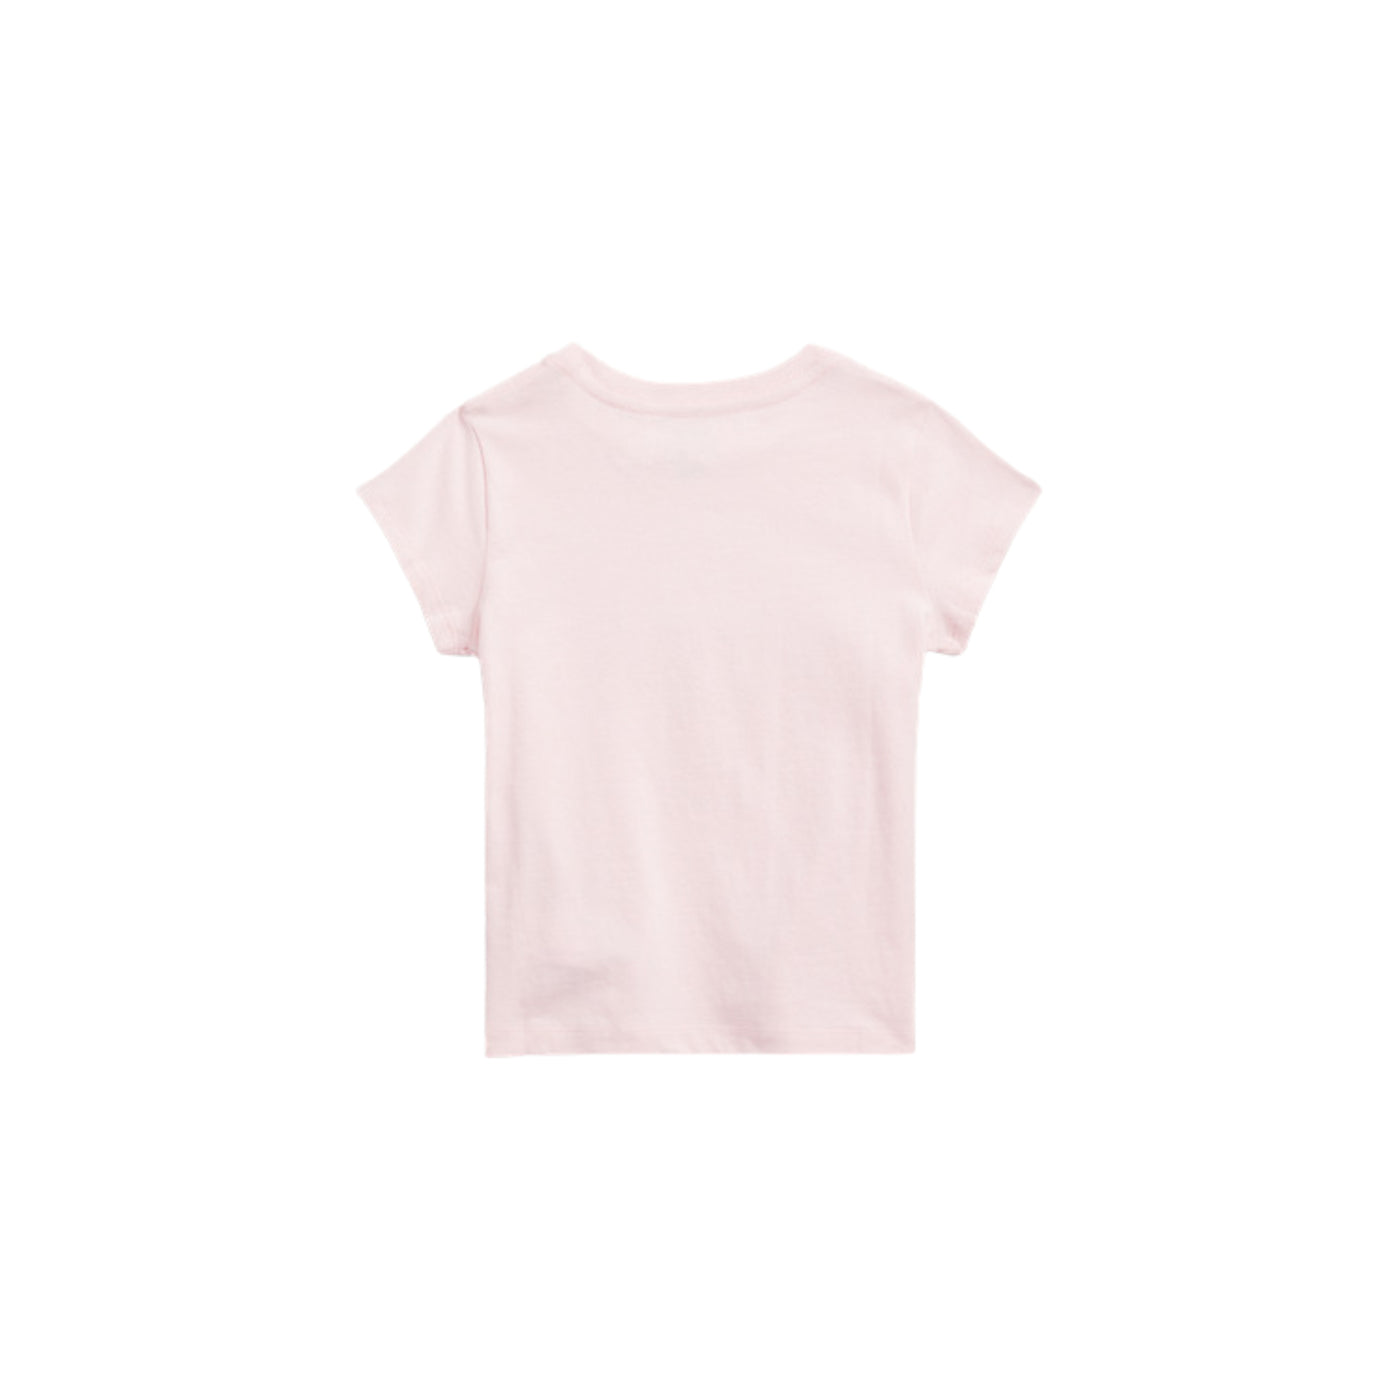 T-shirt for girls 5-7 years in pure cotton with logo